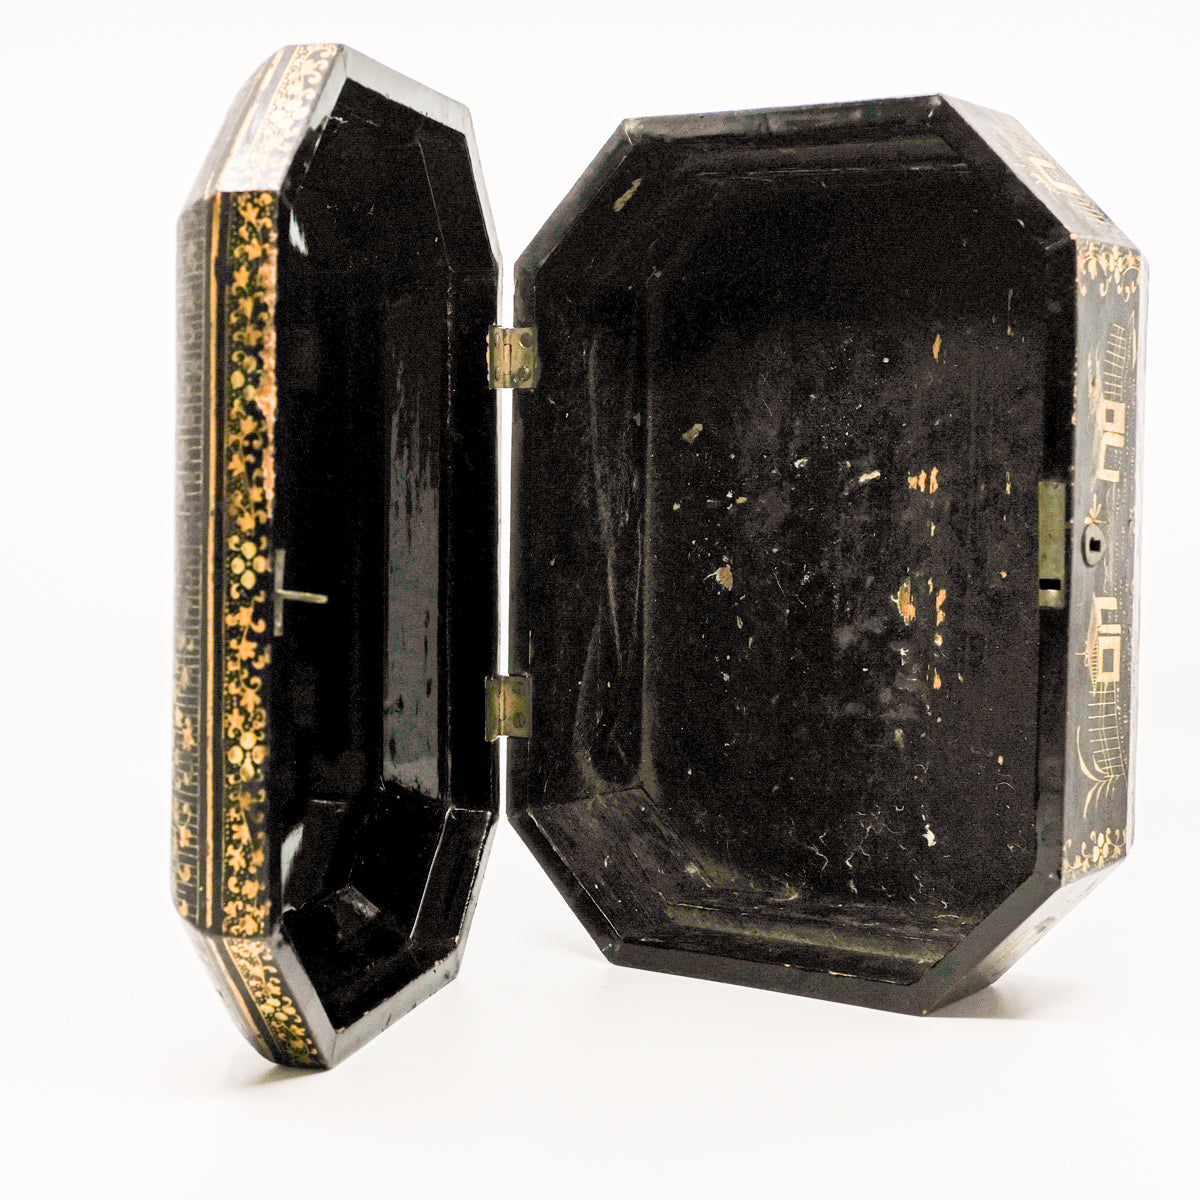 inside of black and gold antique box